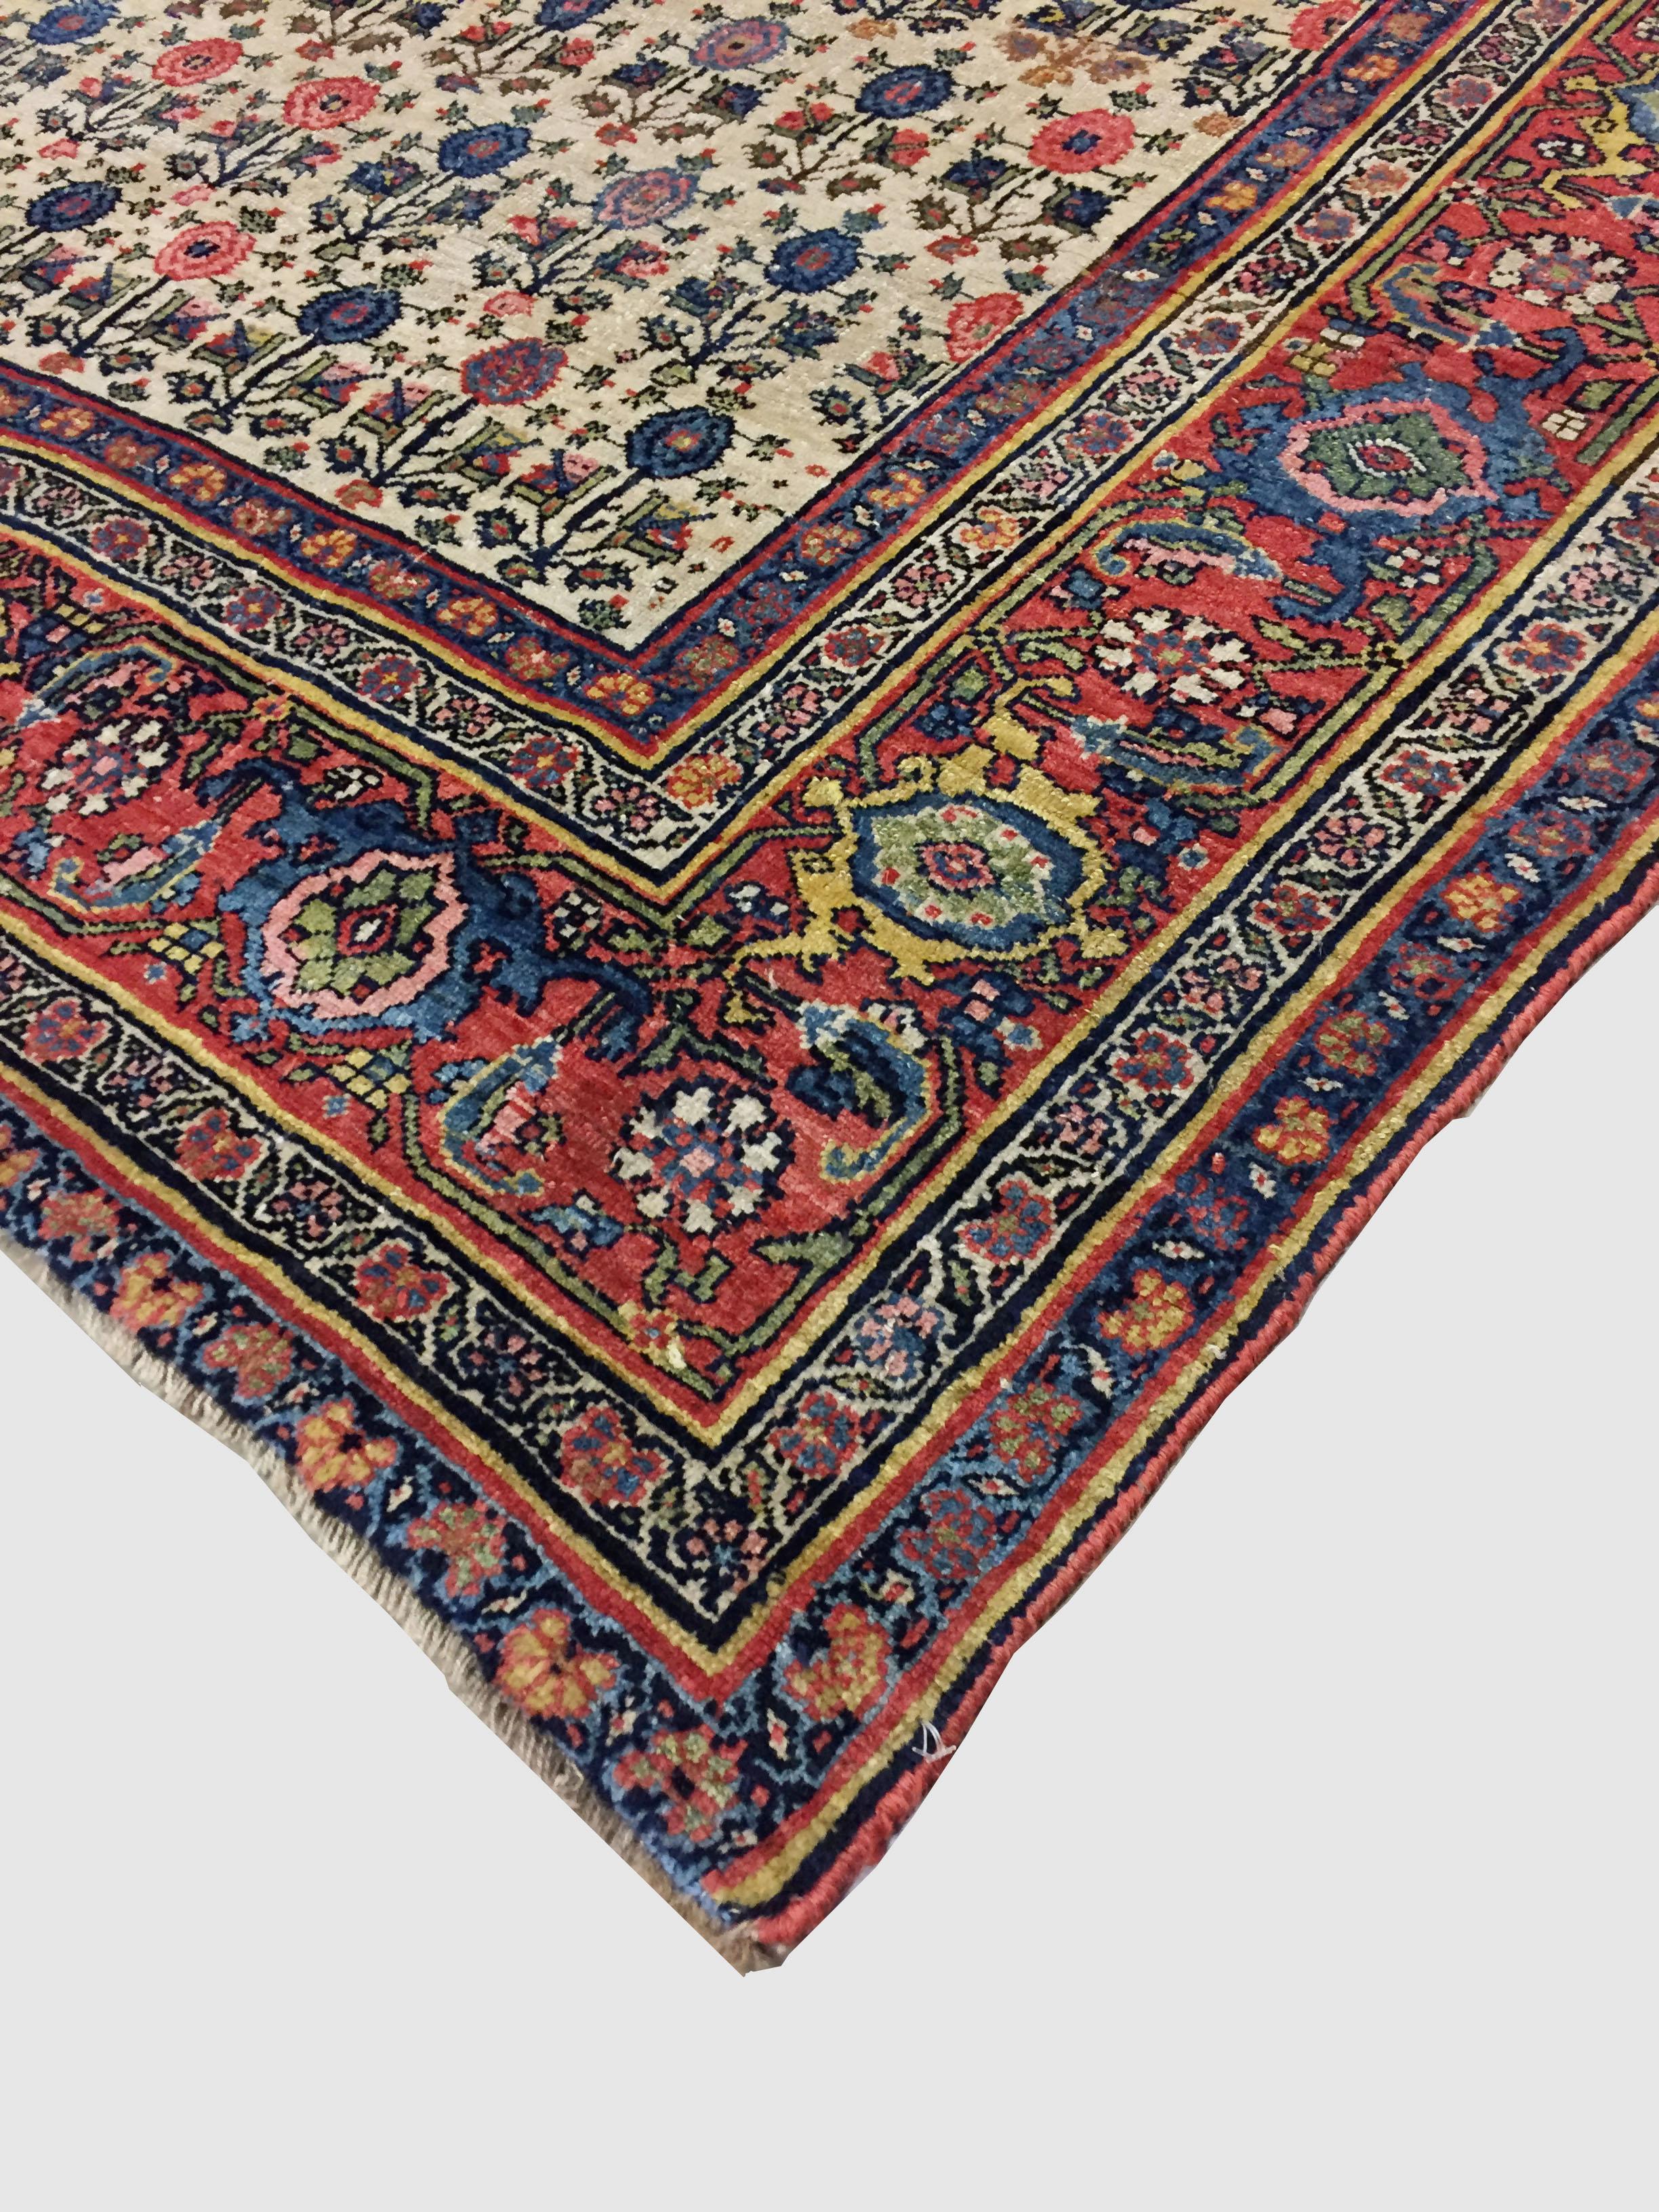 Antique Persian Bidjar Gallery, Runner, 6'6 x 13'8. A wonderful antique Bidjar rug, circa 1880. An Ivory ground filled with floral motifs in a vast array of beautiful colors, the detail is amazing. This rug has an abrash which is a natural change in